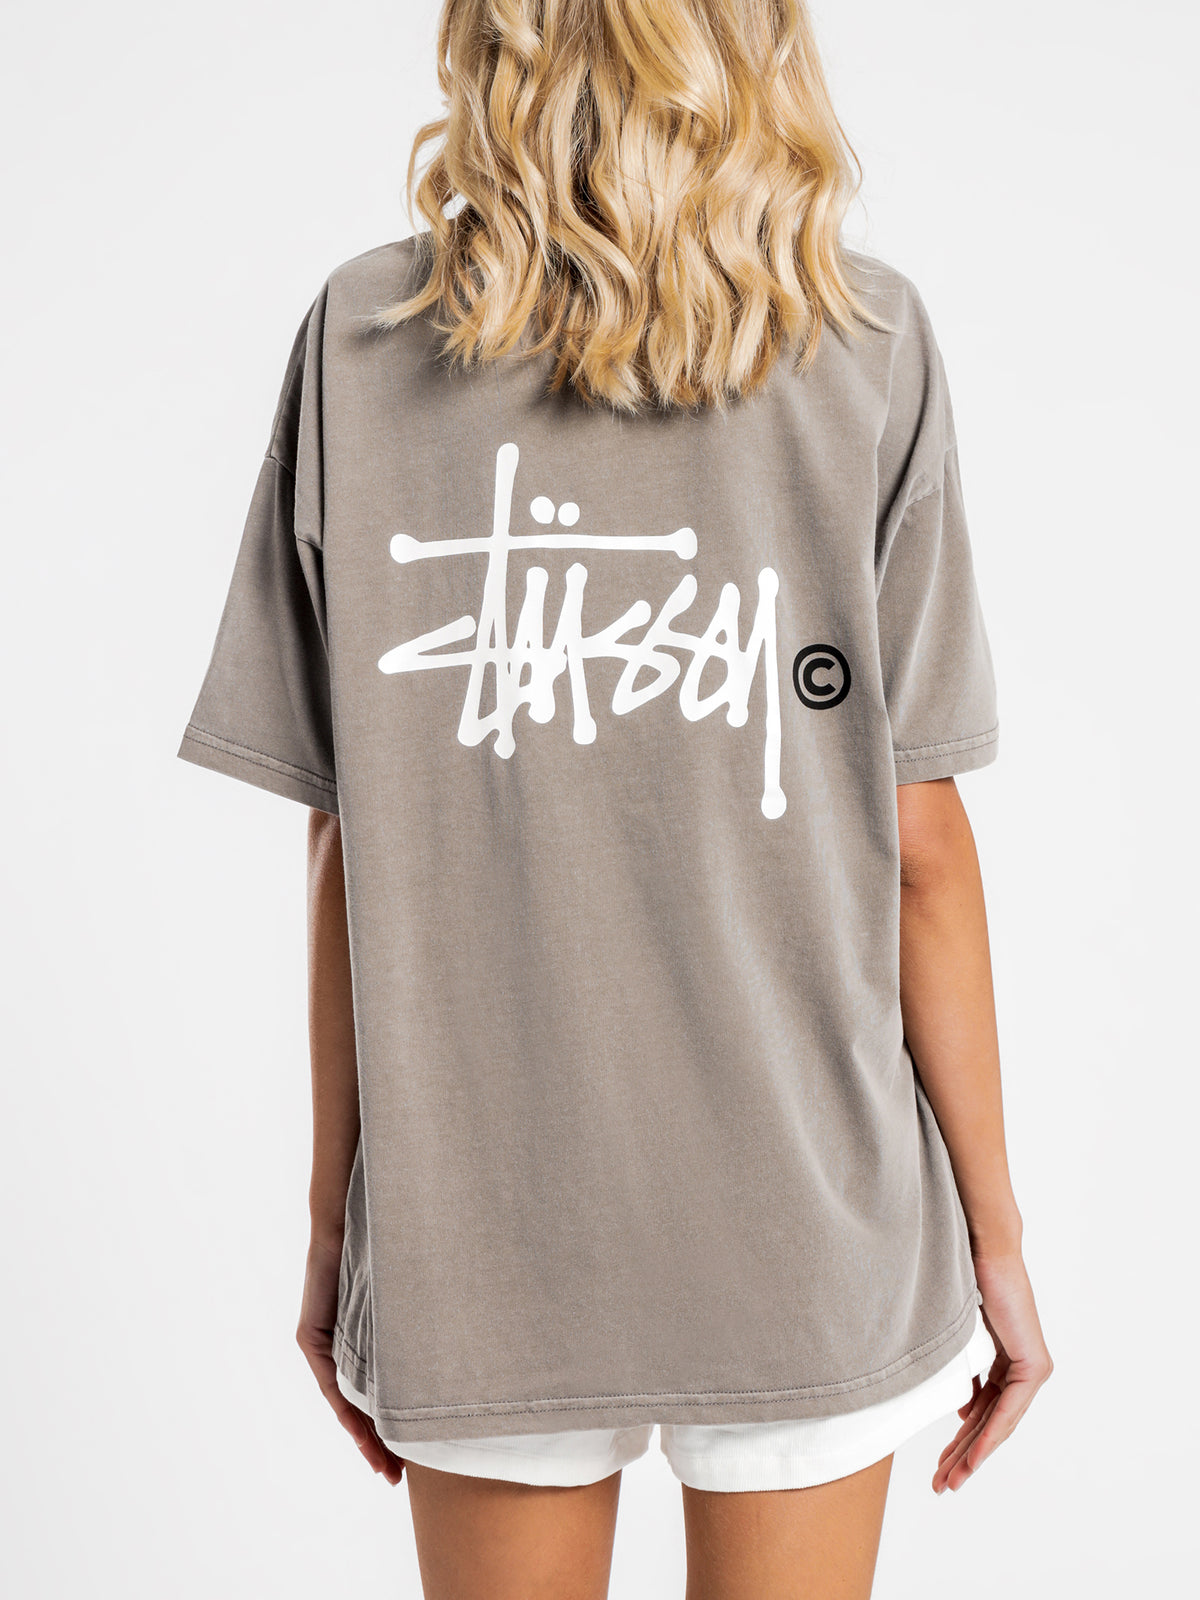 Graffiti Pigment Relaxed T-Shirt in Taupe